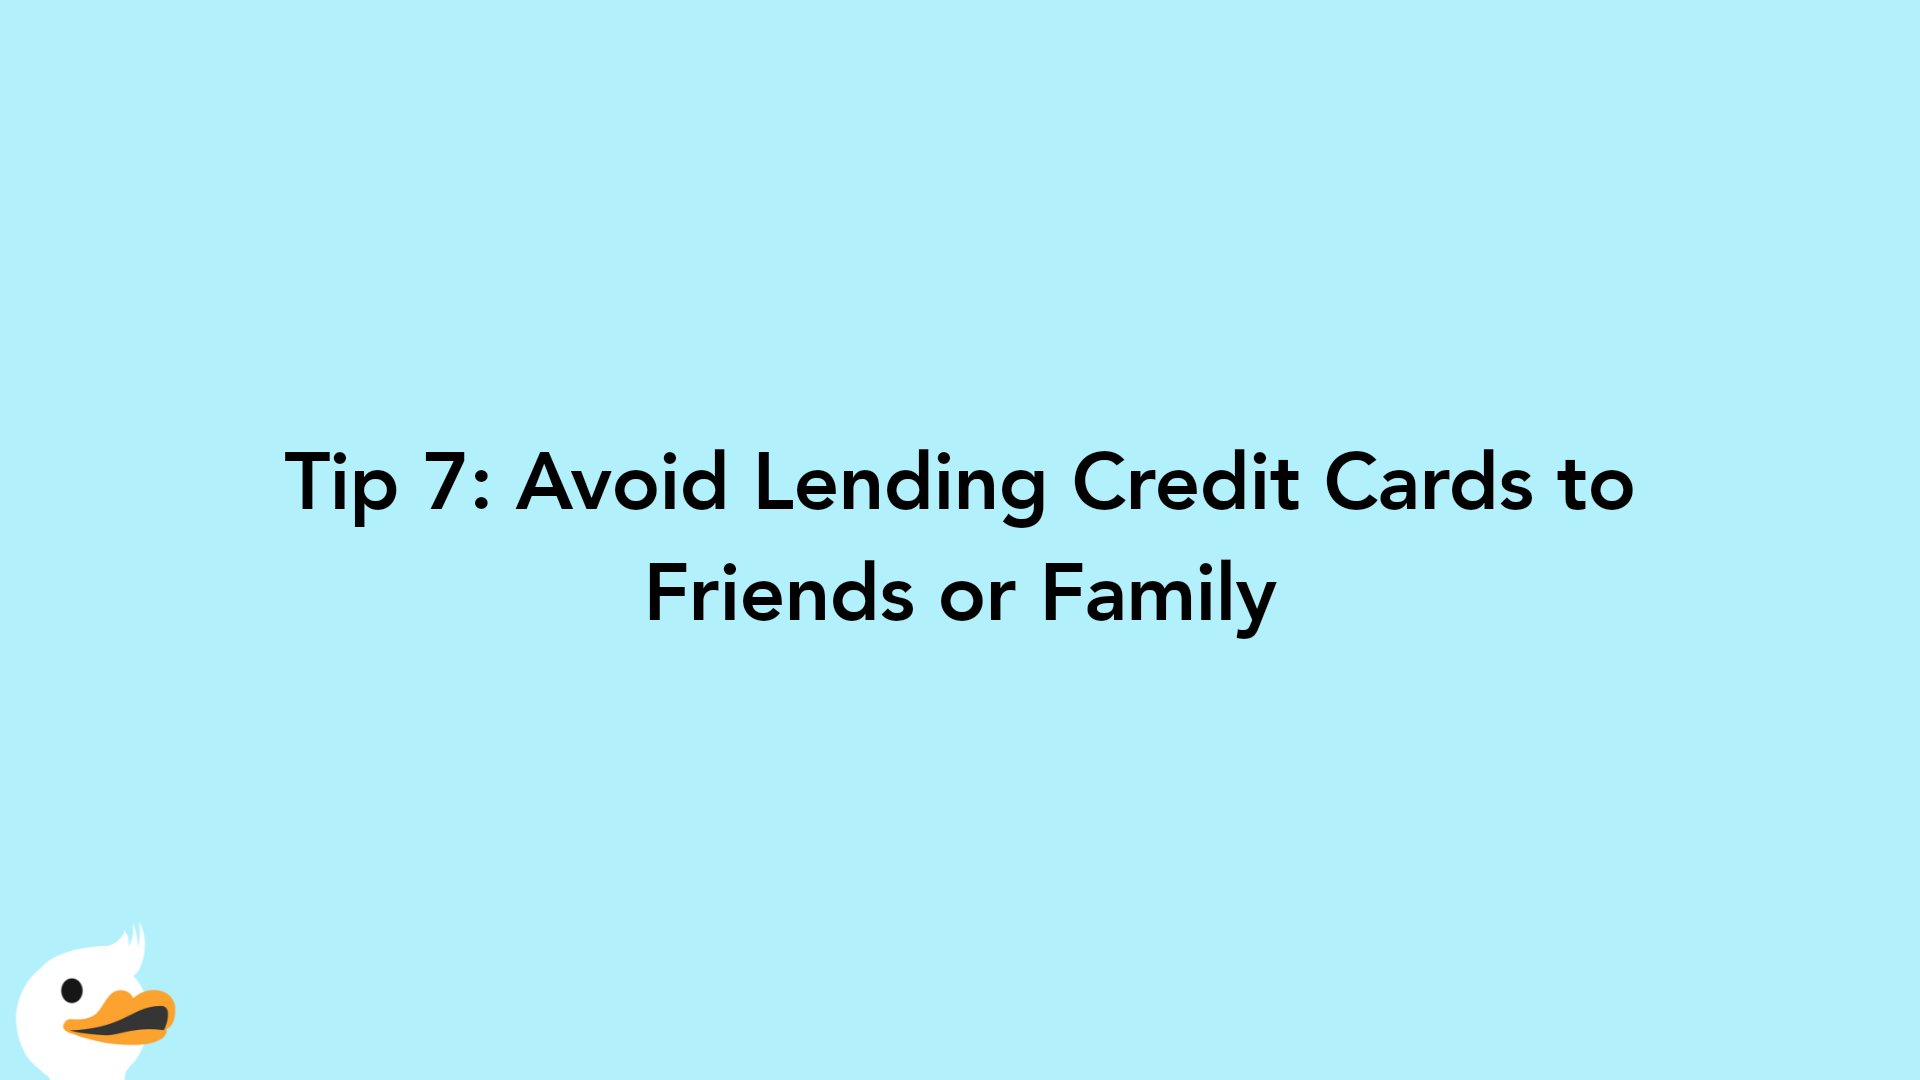 Tip 7: Avoid Lending Credit Cards to Friends or Family